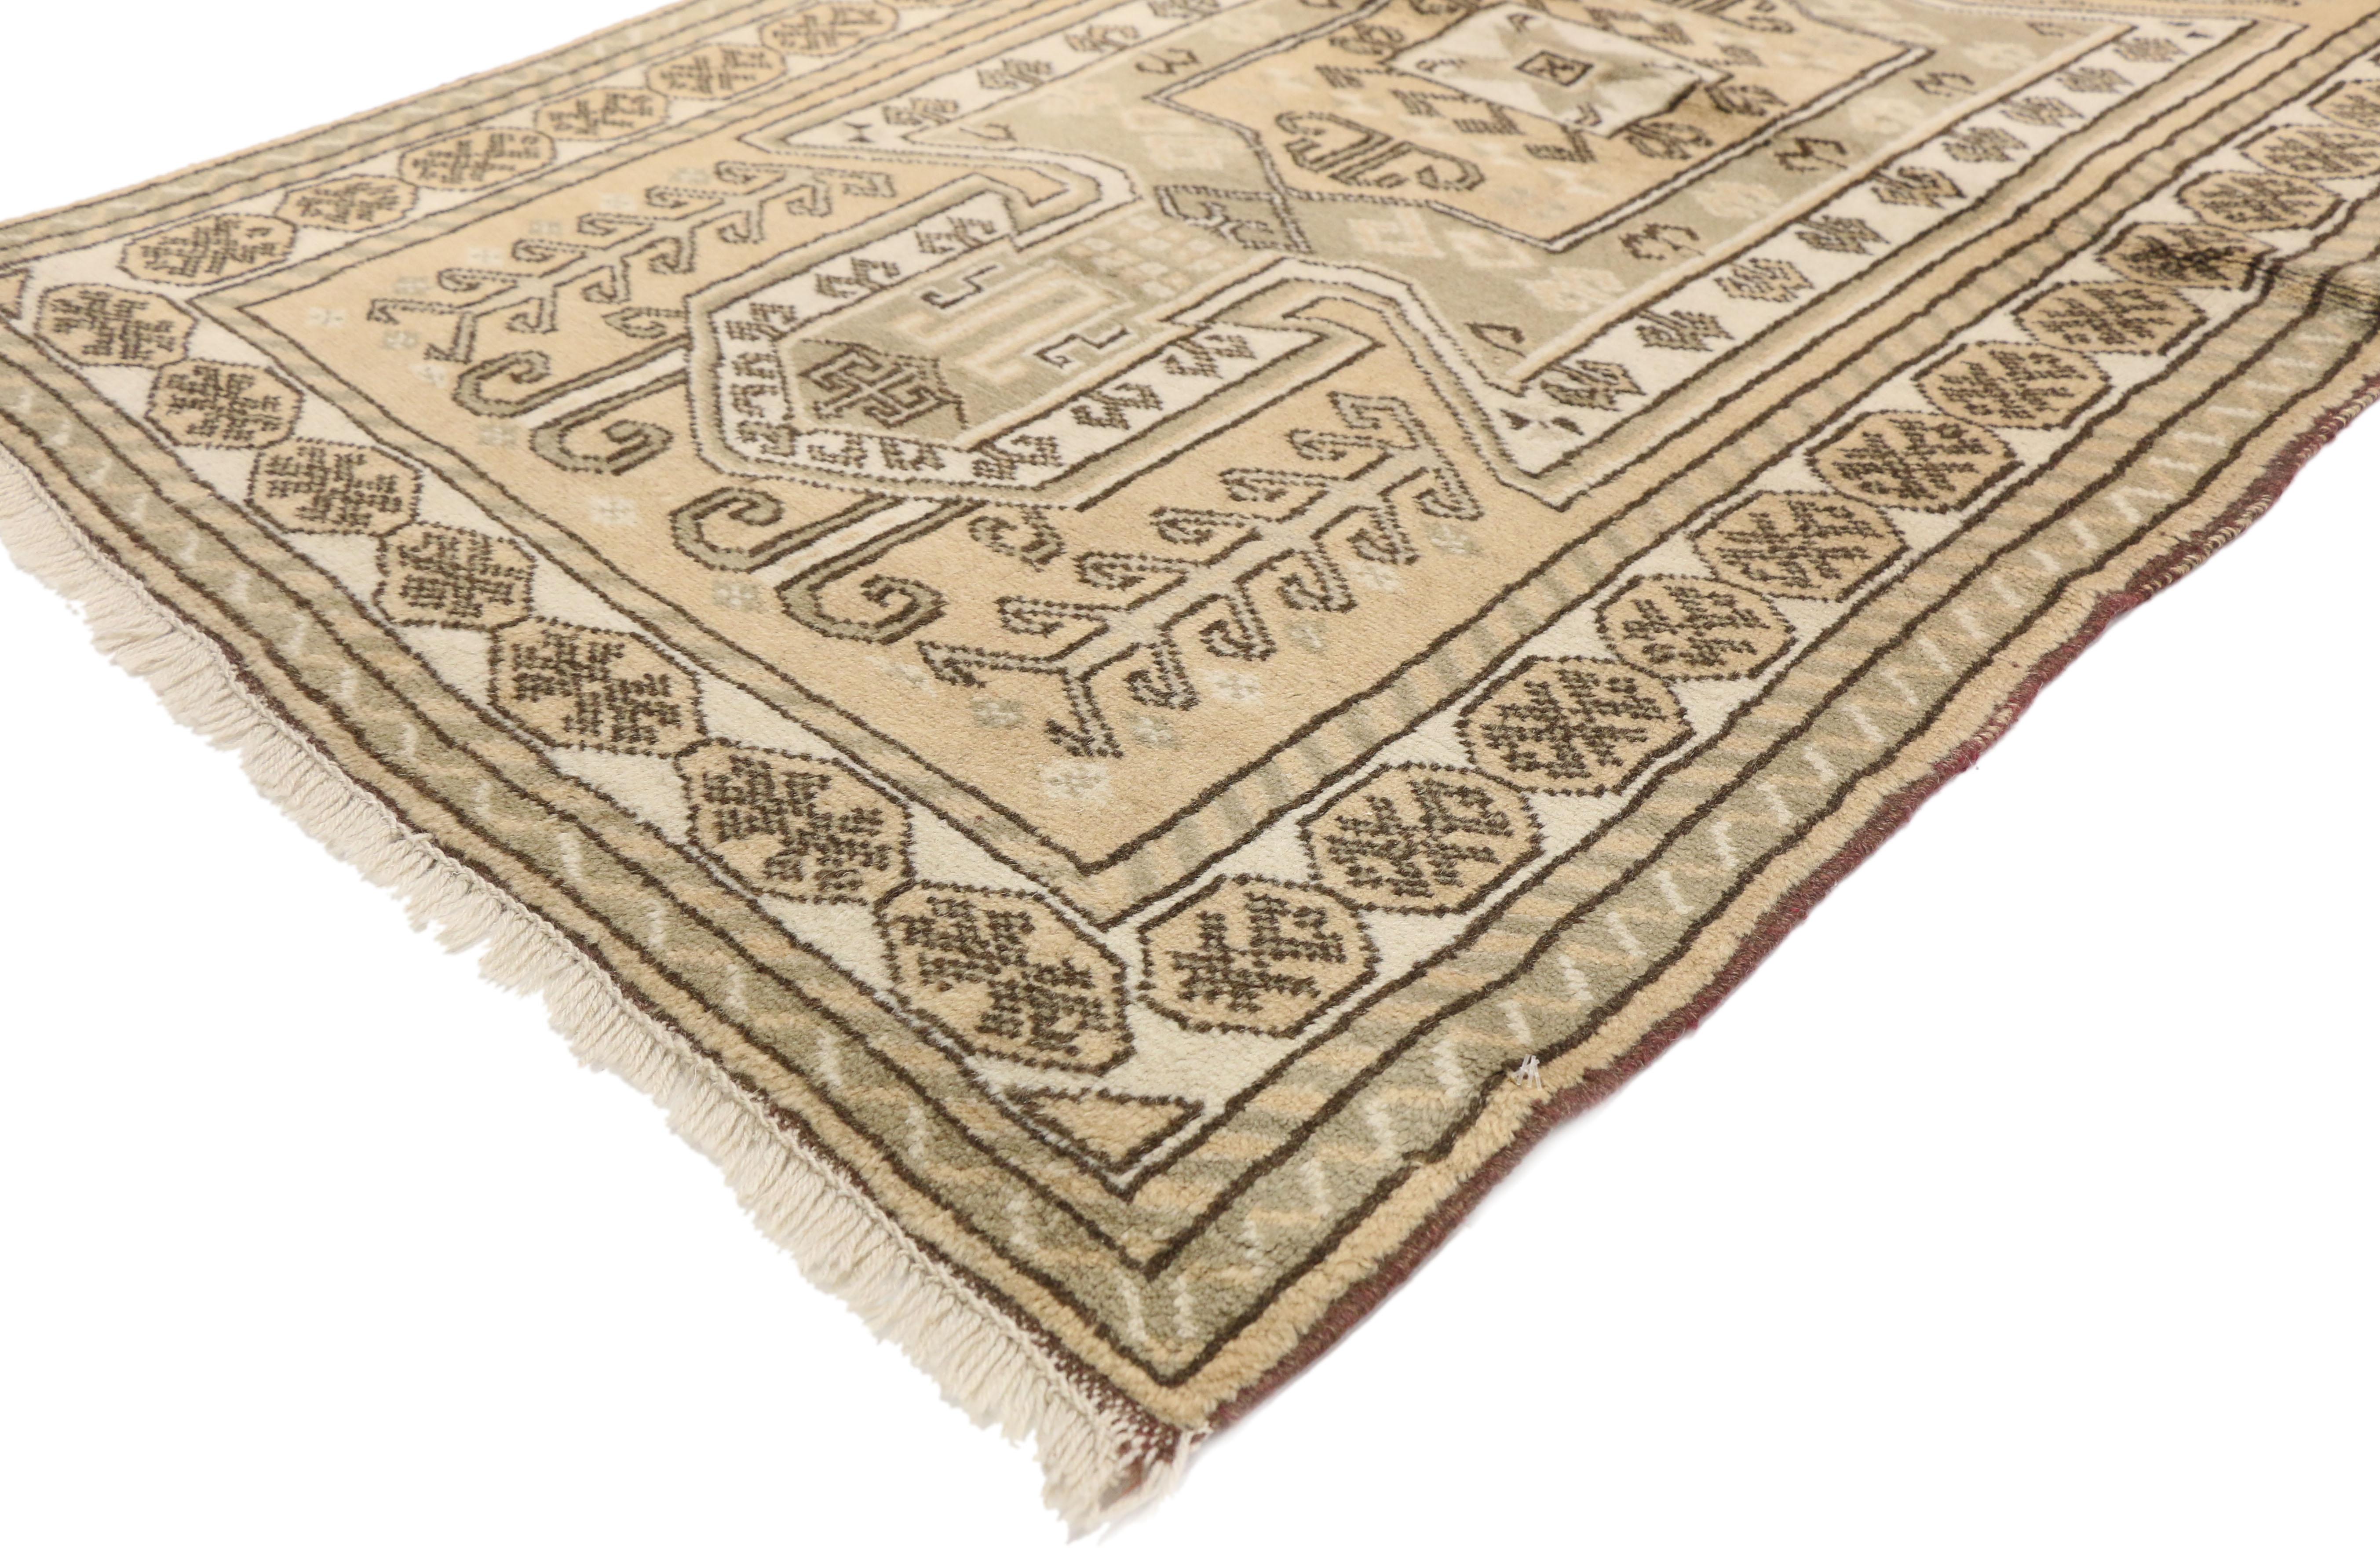 70126, vintage Sevan Kazak Persian Shirvan rug with Tribal style in warm, Monochromatic Colors. Blending elements from the modern world with an amalgam of Caucasian Qashqai Tribe influence and monochromatic hues, this hand knotted wool vintage Sevan